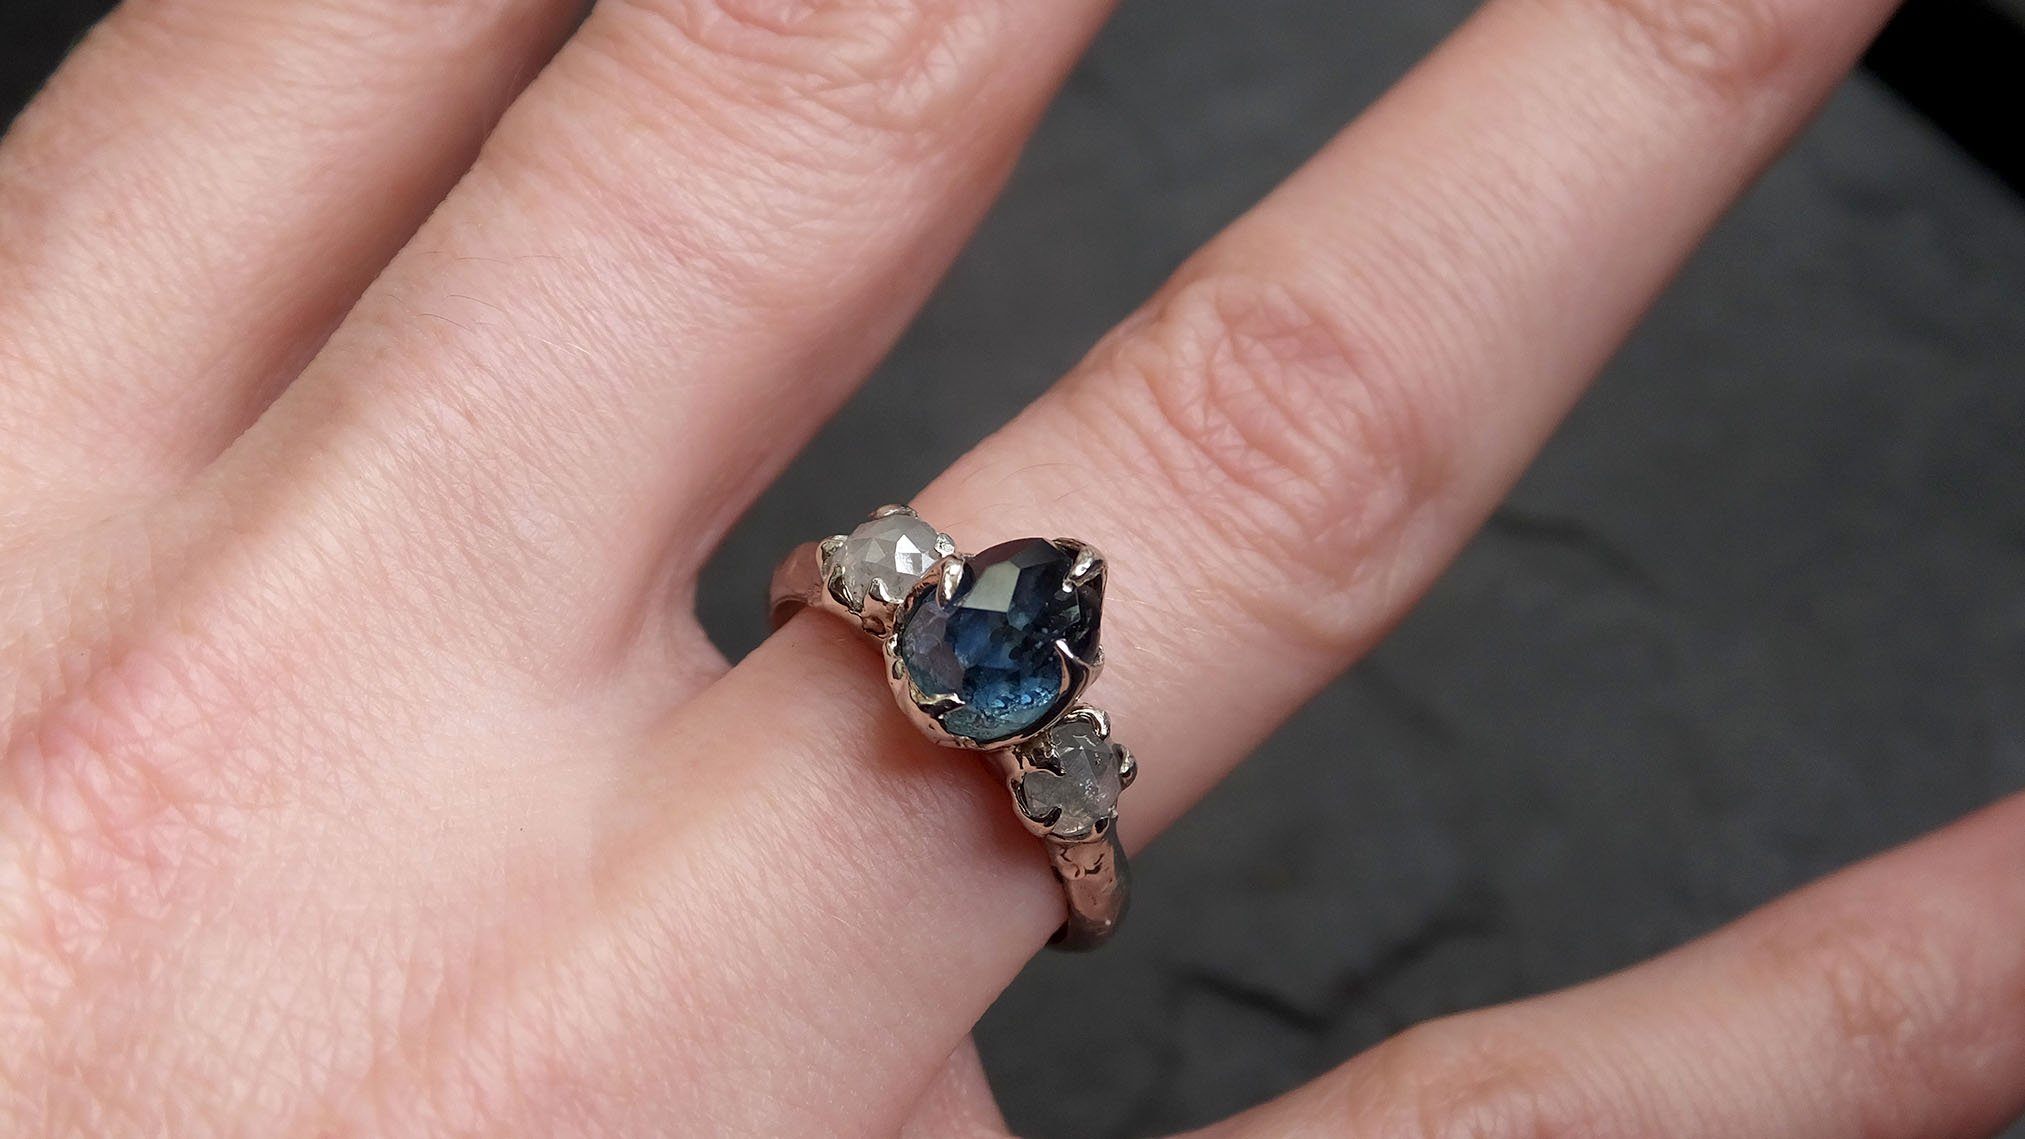 partially faceted blue montana sapphire and fancy diamonds 18k white gold engagement wedding ring custom gemstone ring multi stone ring 2133 Alternative Engagement